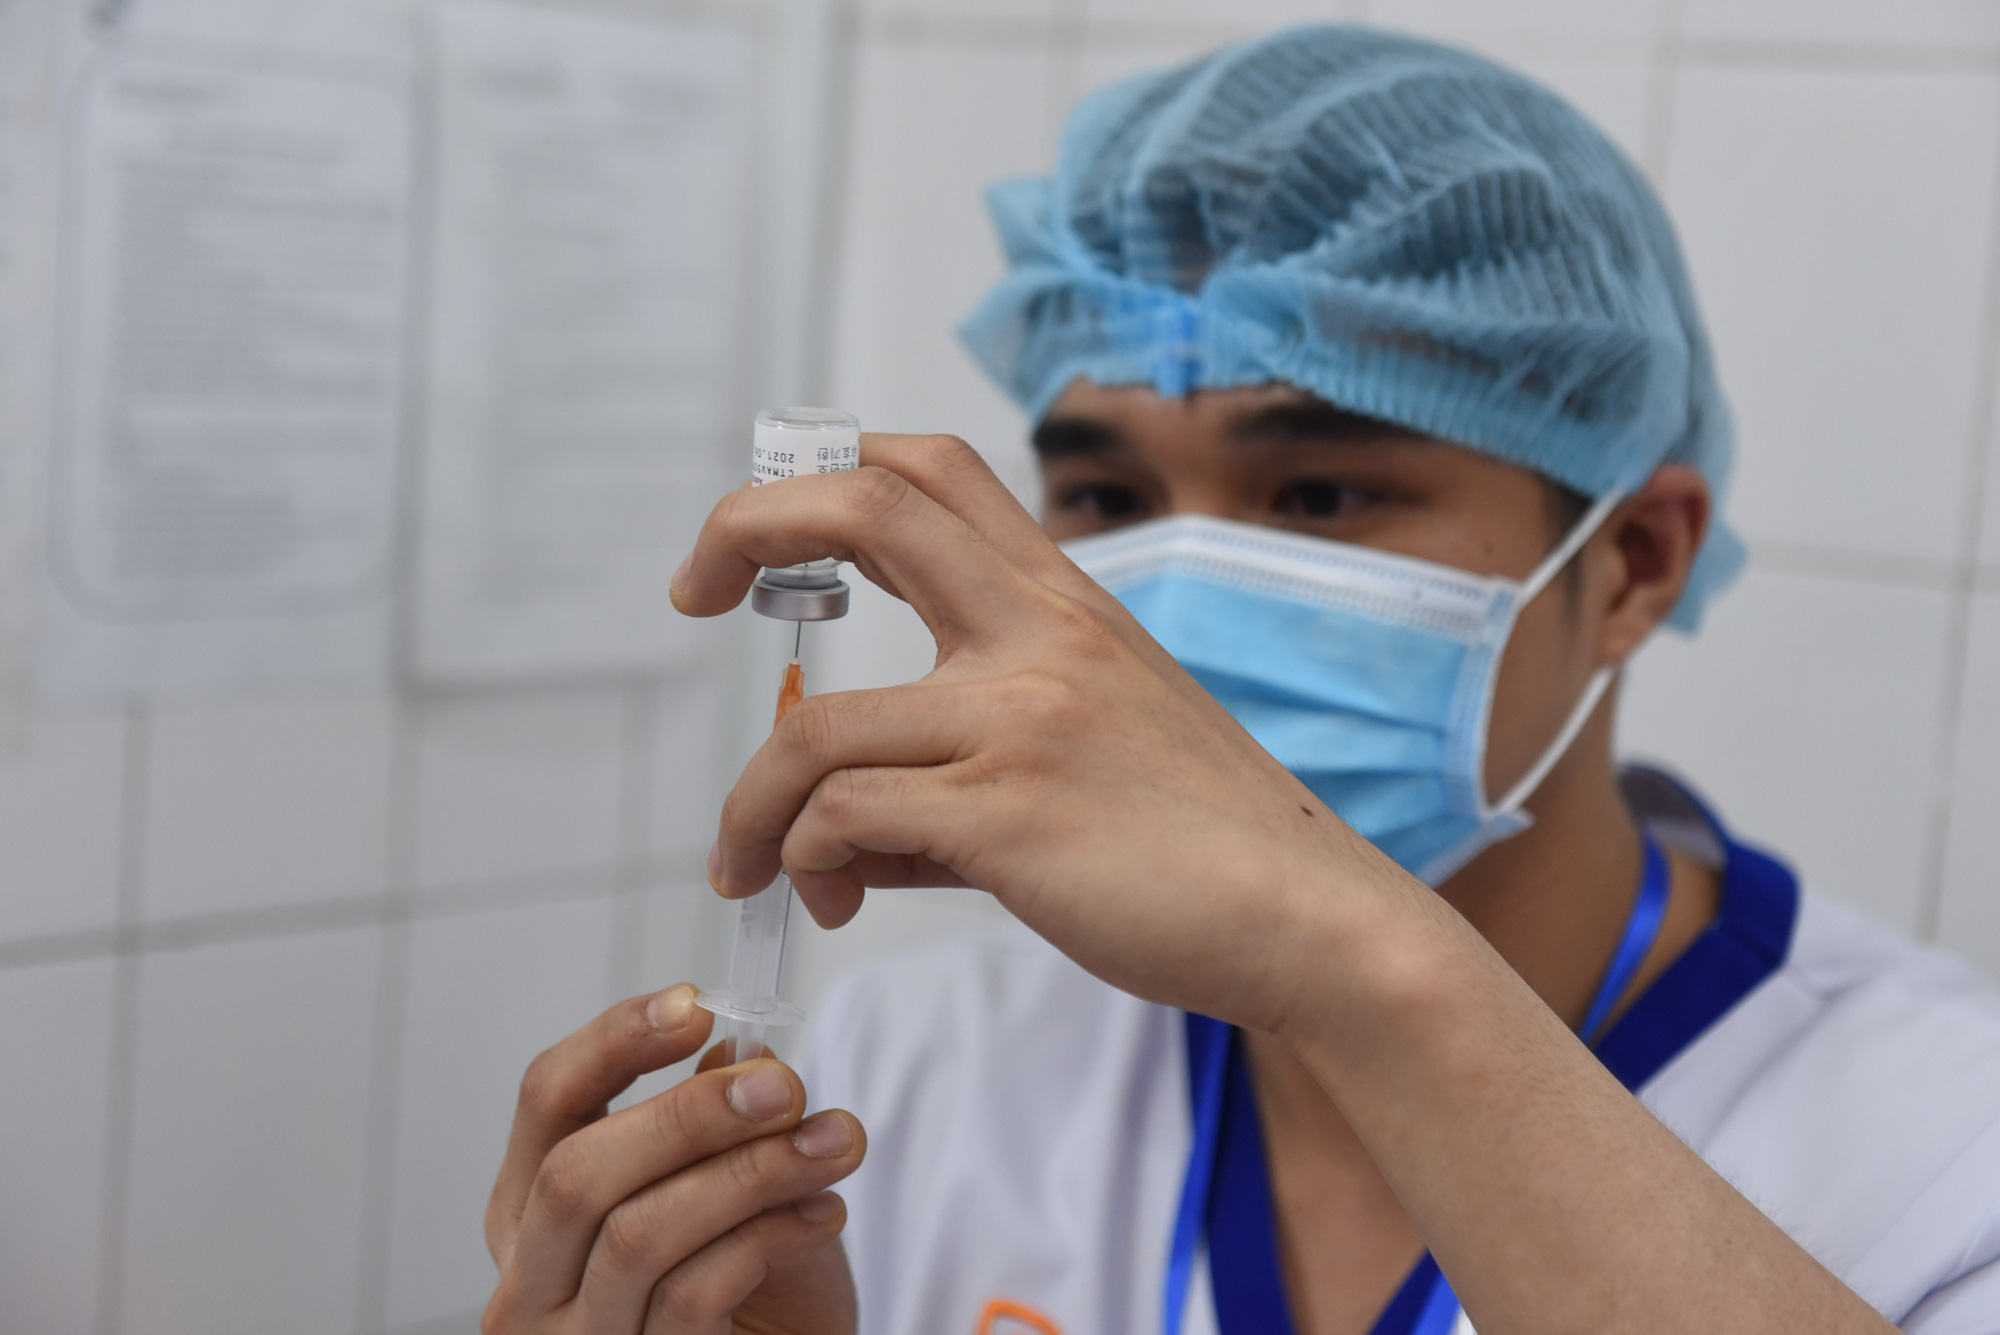 Government allows Ho Chi Minh City to purchase, import COVID-19 vaccines